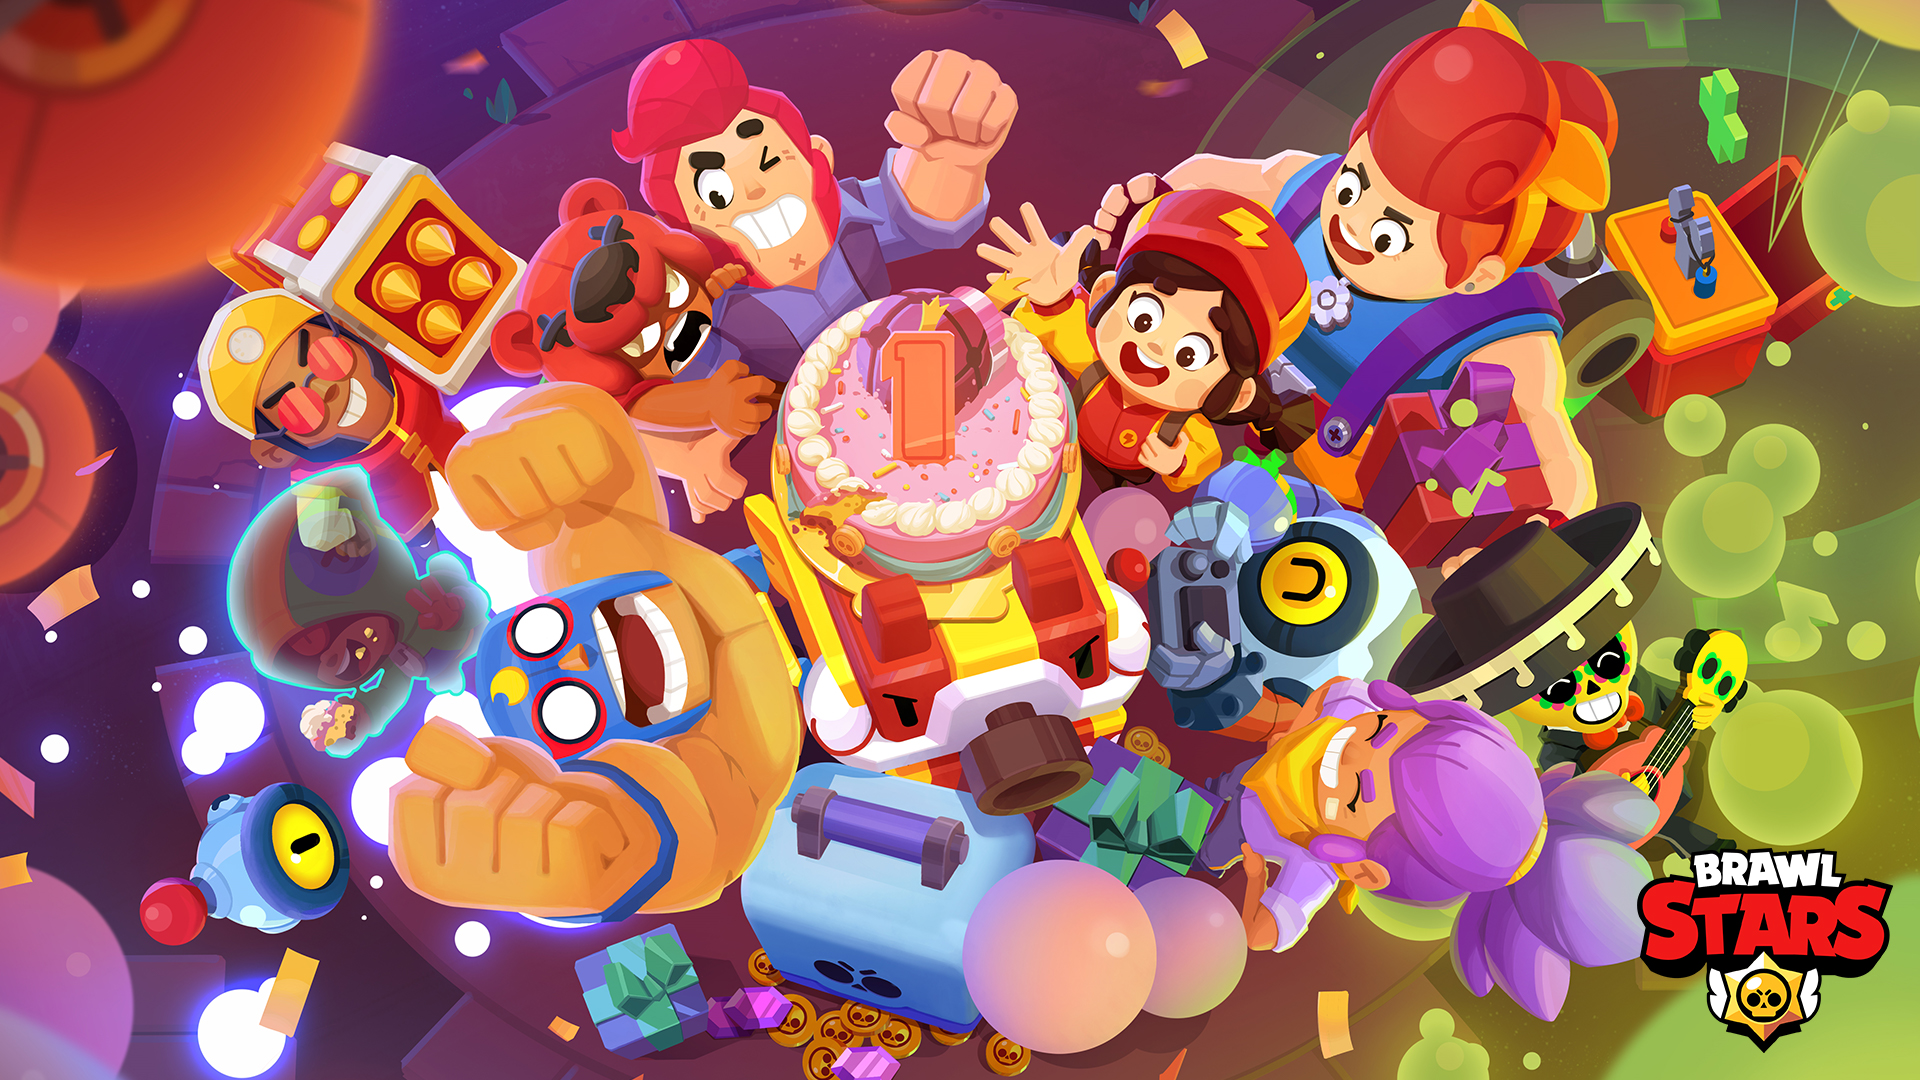 Brawl Stars On Twitter Today Is Brawl Stars 1st Anniversary In China How About If We Celebrate It With 9 Days Of Daily Rewards Including Boxes Pins And A Free Skin - anniversary gift brawl stars